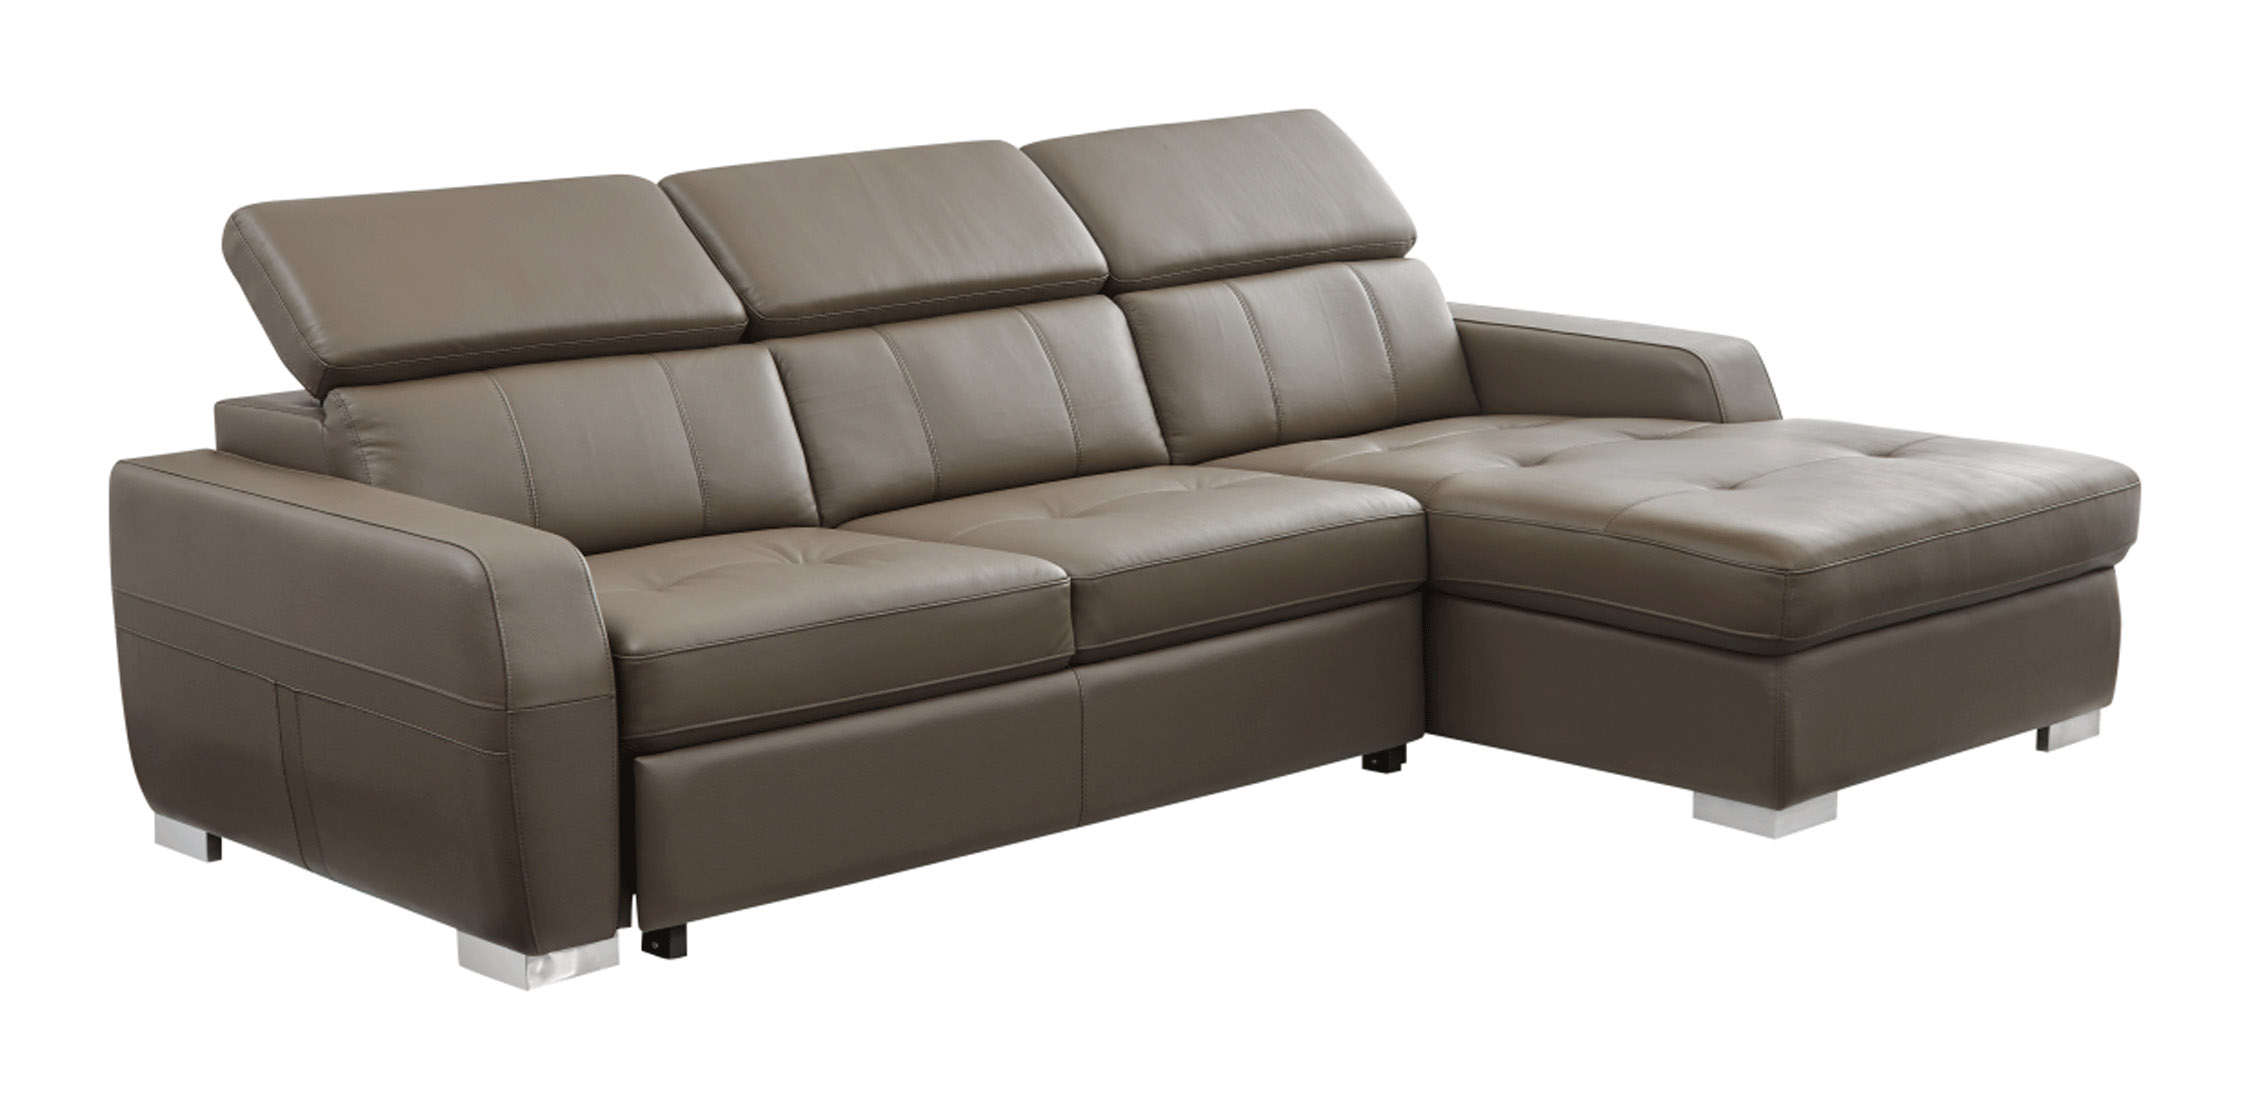 Stylish Sectional with Chrome Legs High Quality Leather - Click Image to Close